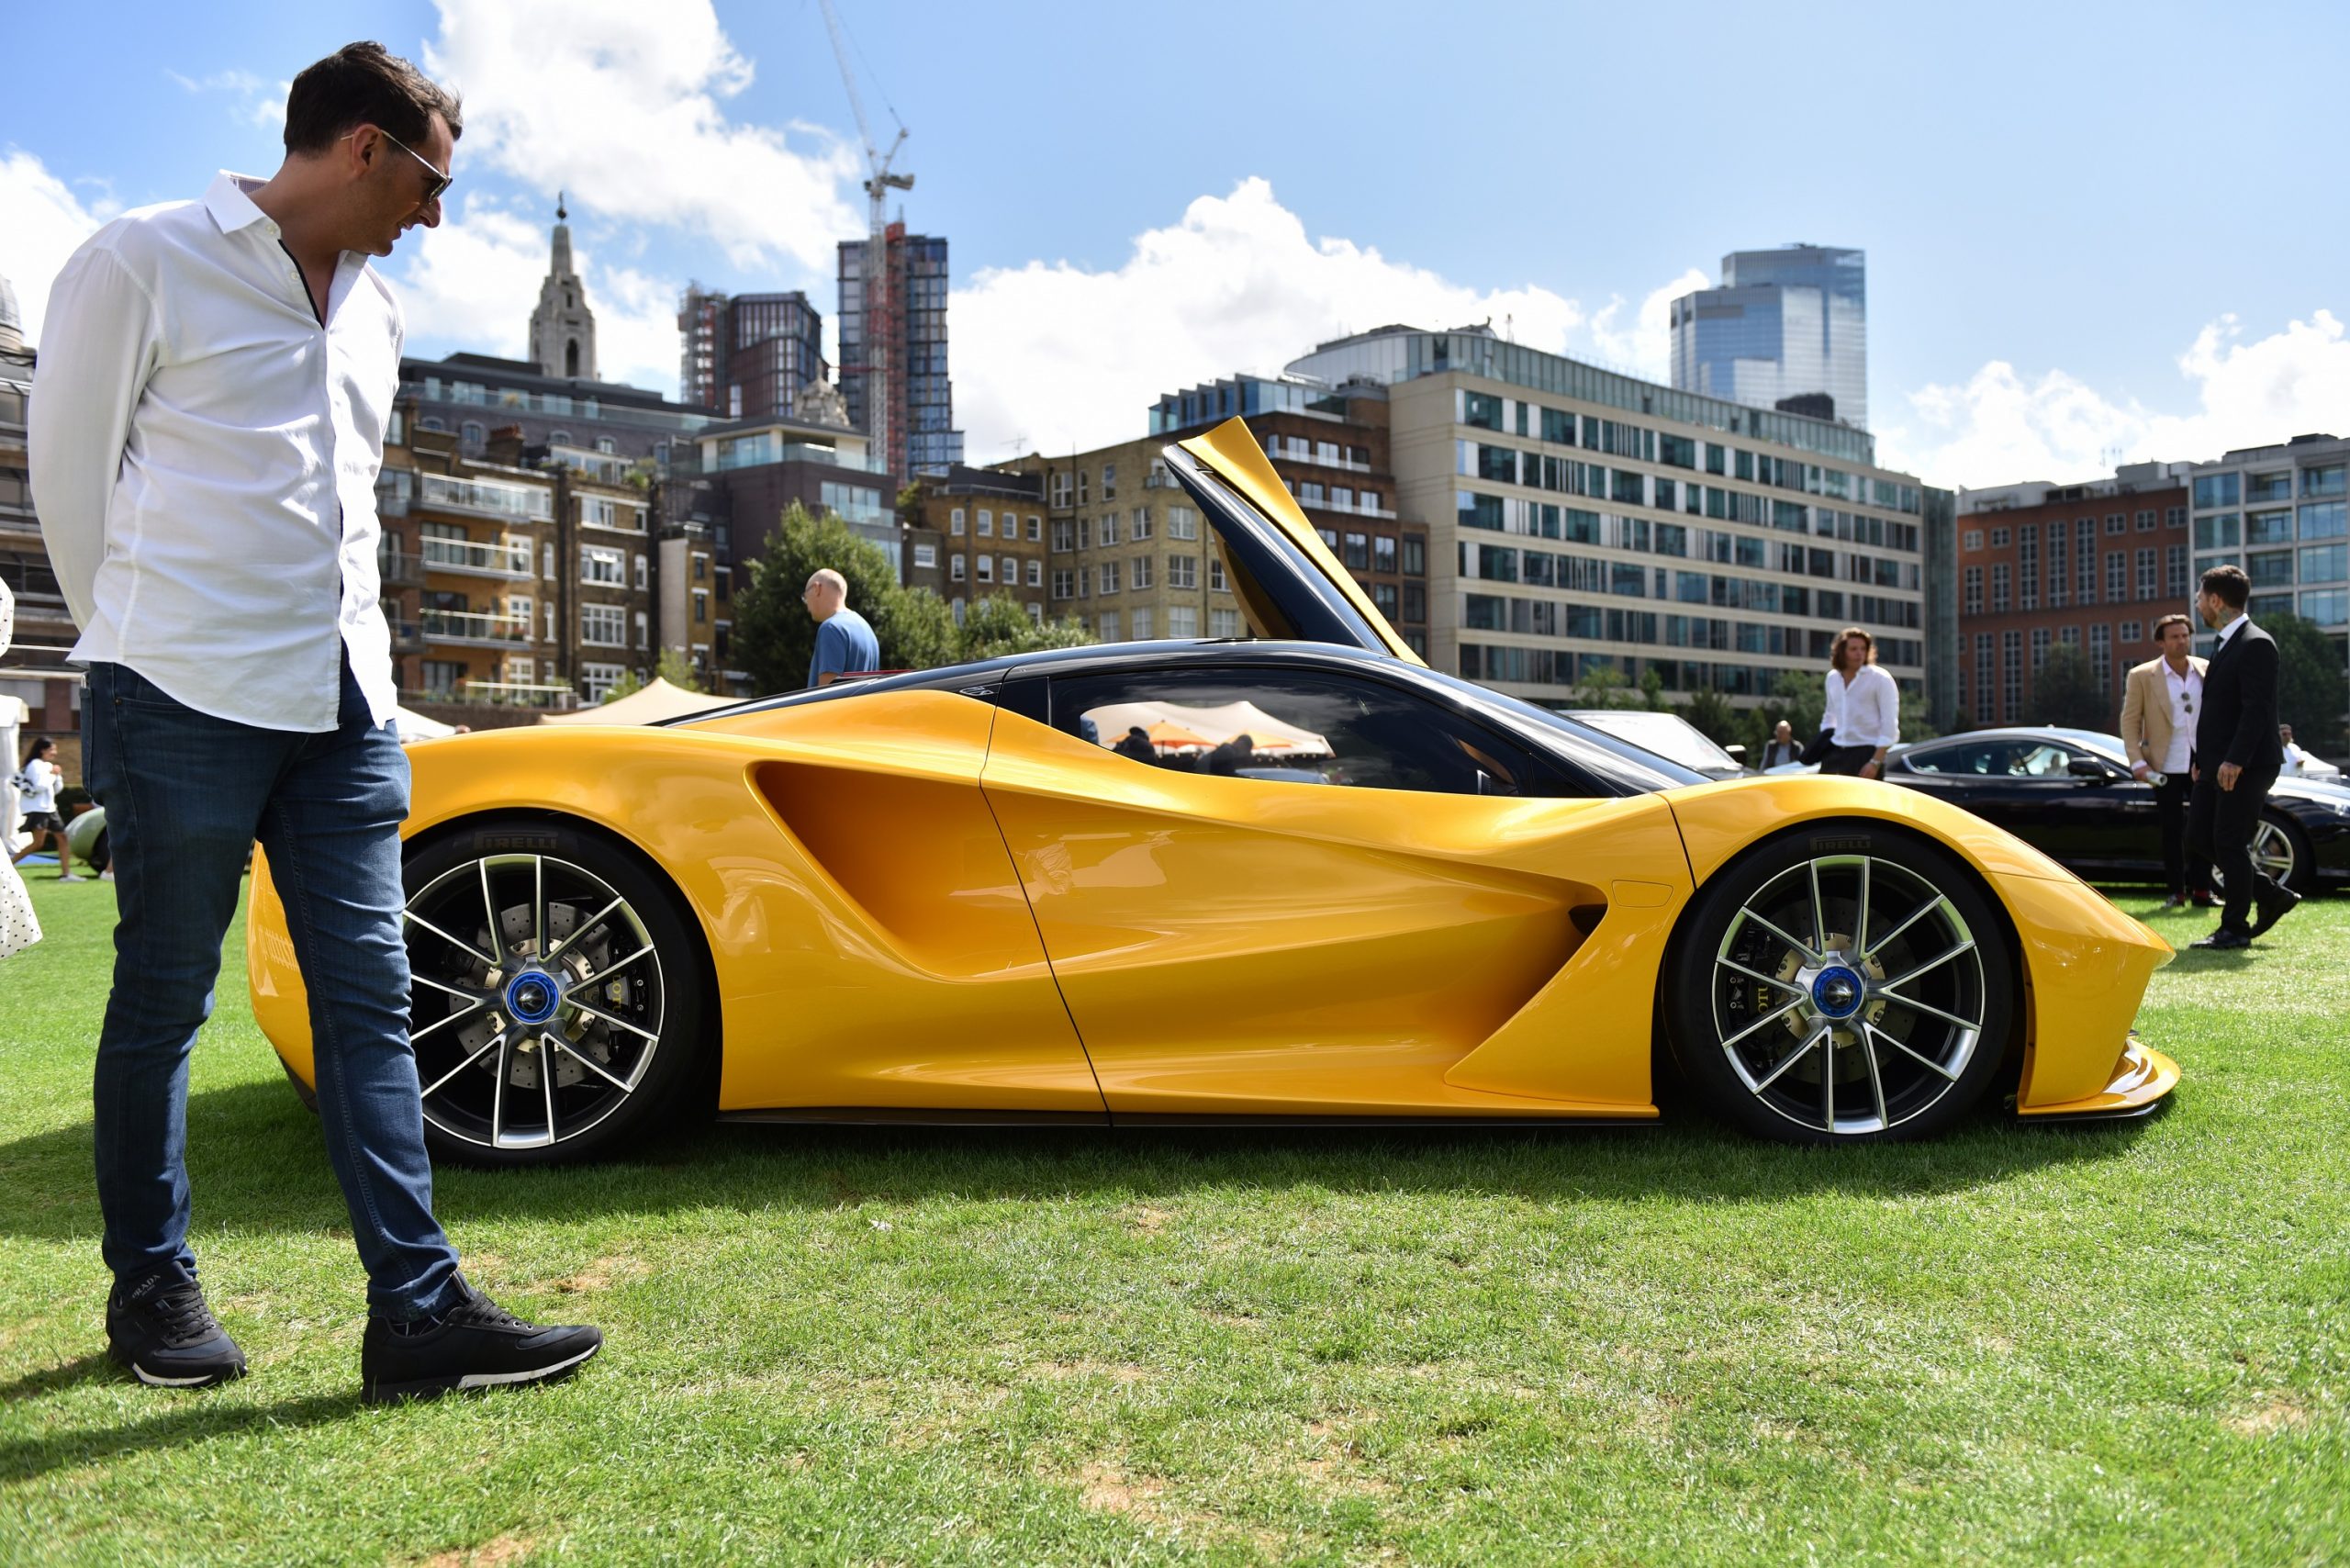 A yellow Lotus Evija is admired by a passerby at a concourse event, shot in profile